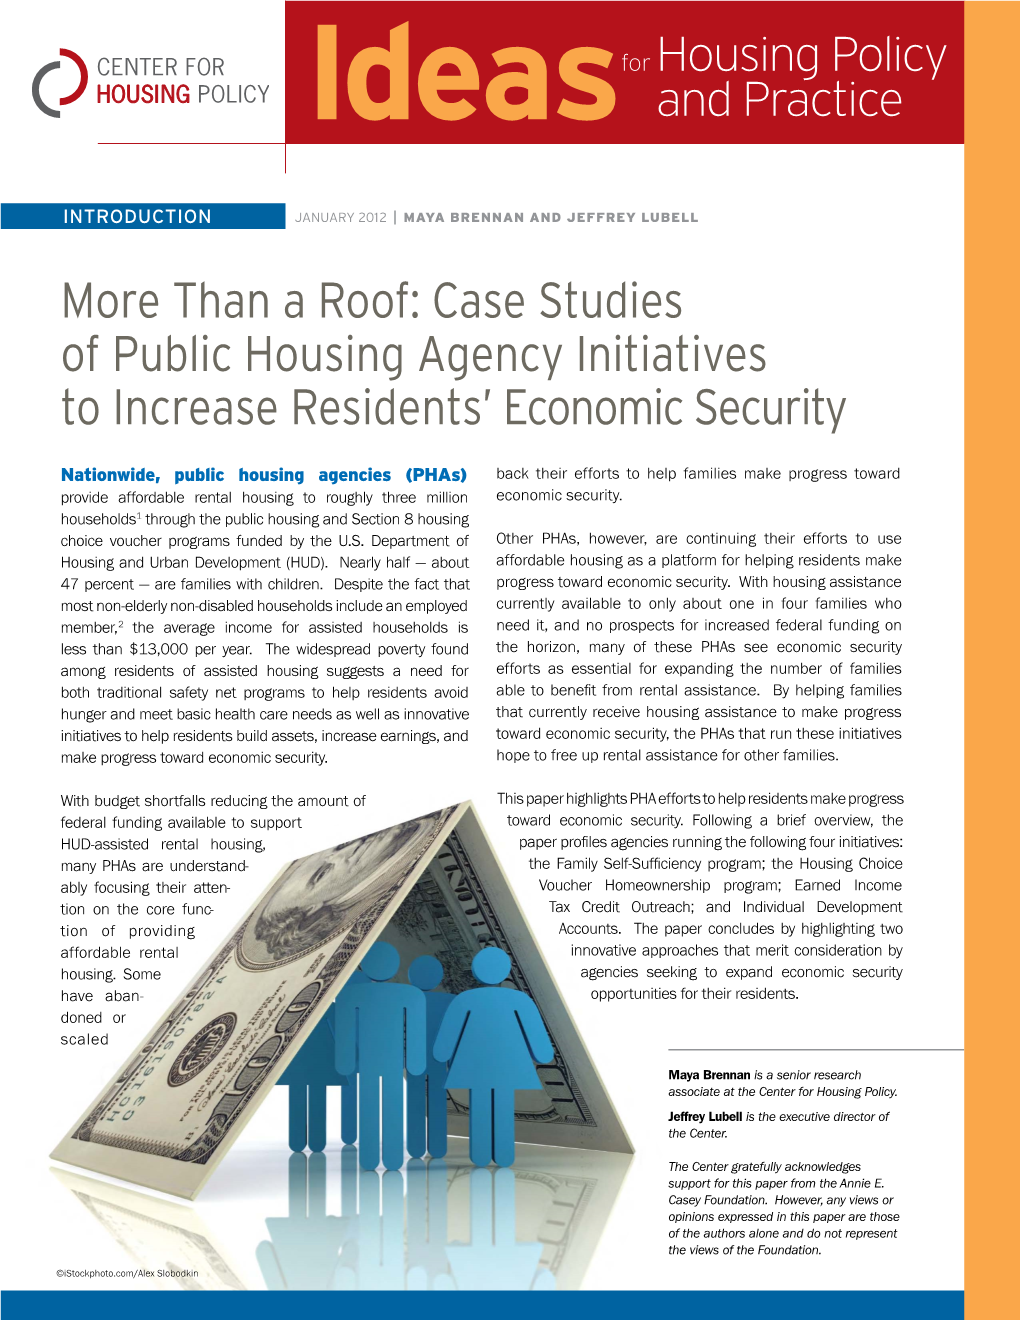 More Than a Roof: Case Studies of Public Housing Agency Initiatives to Increase Residents’ Economic Security